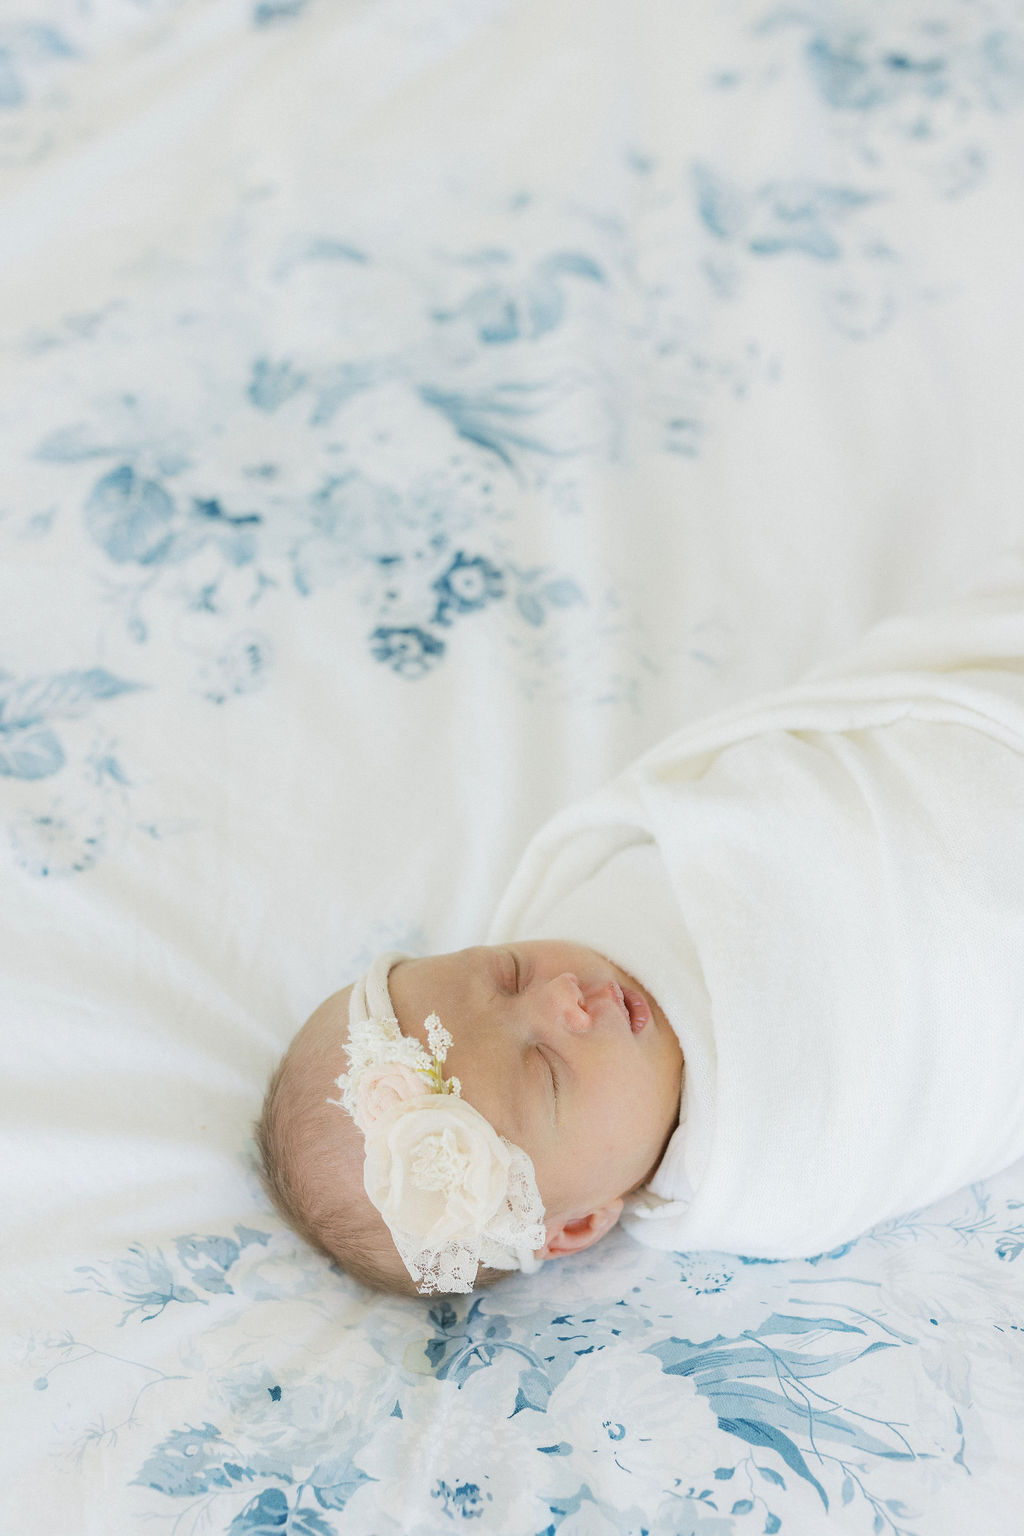 A sleeping newborn baby laying on a bed in a floral headband and white swaddle